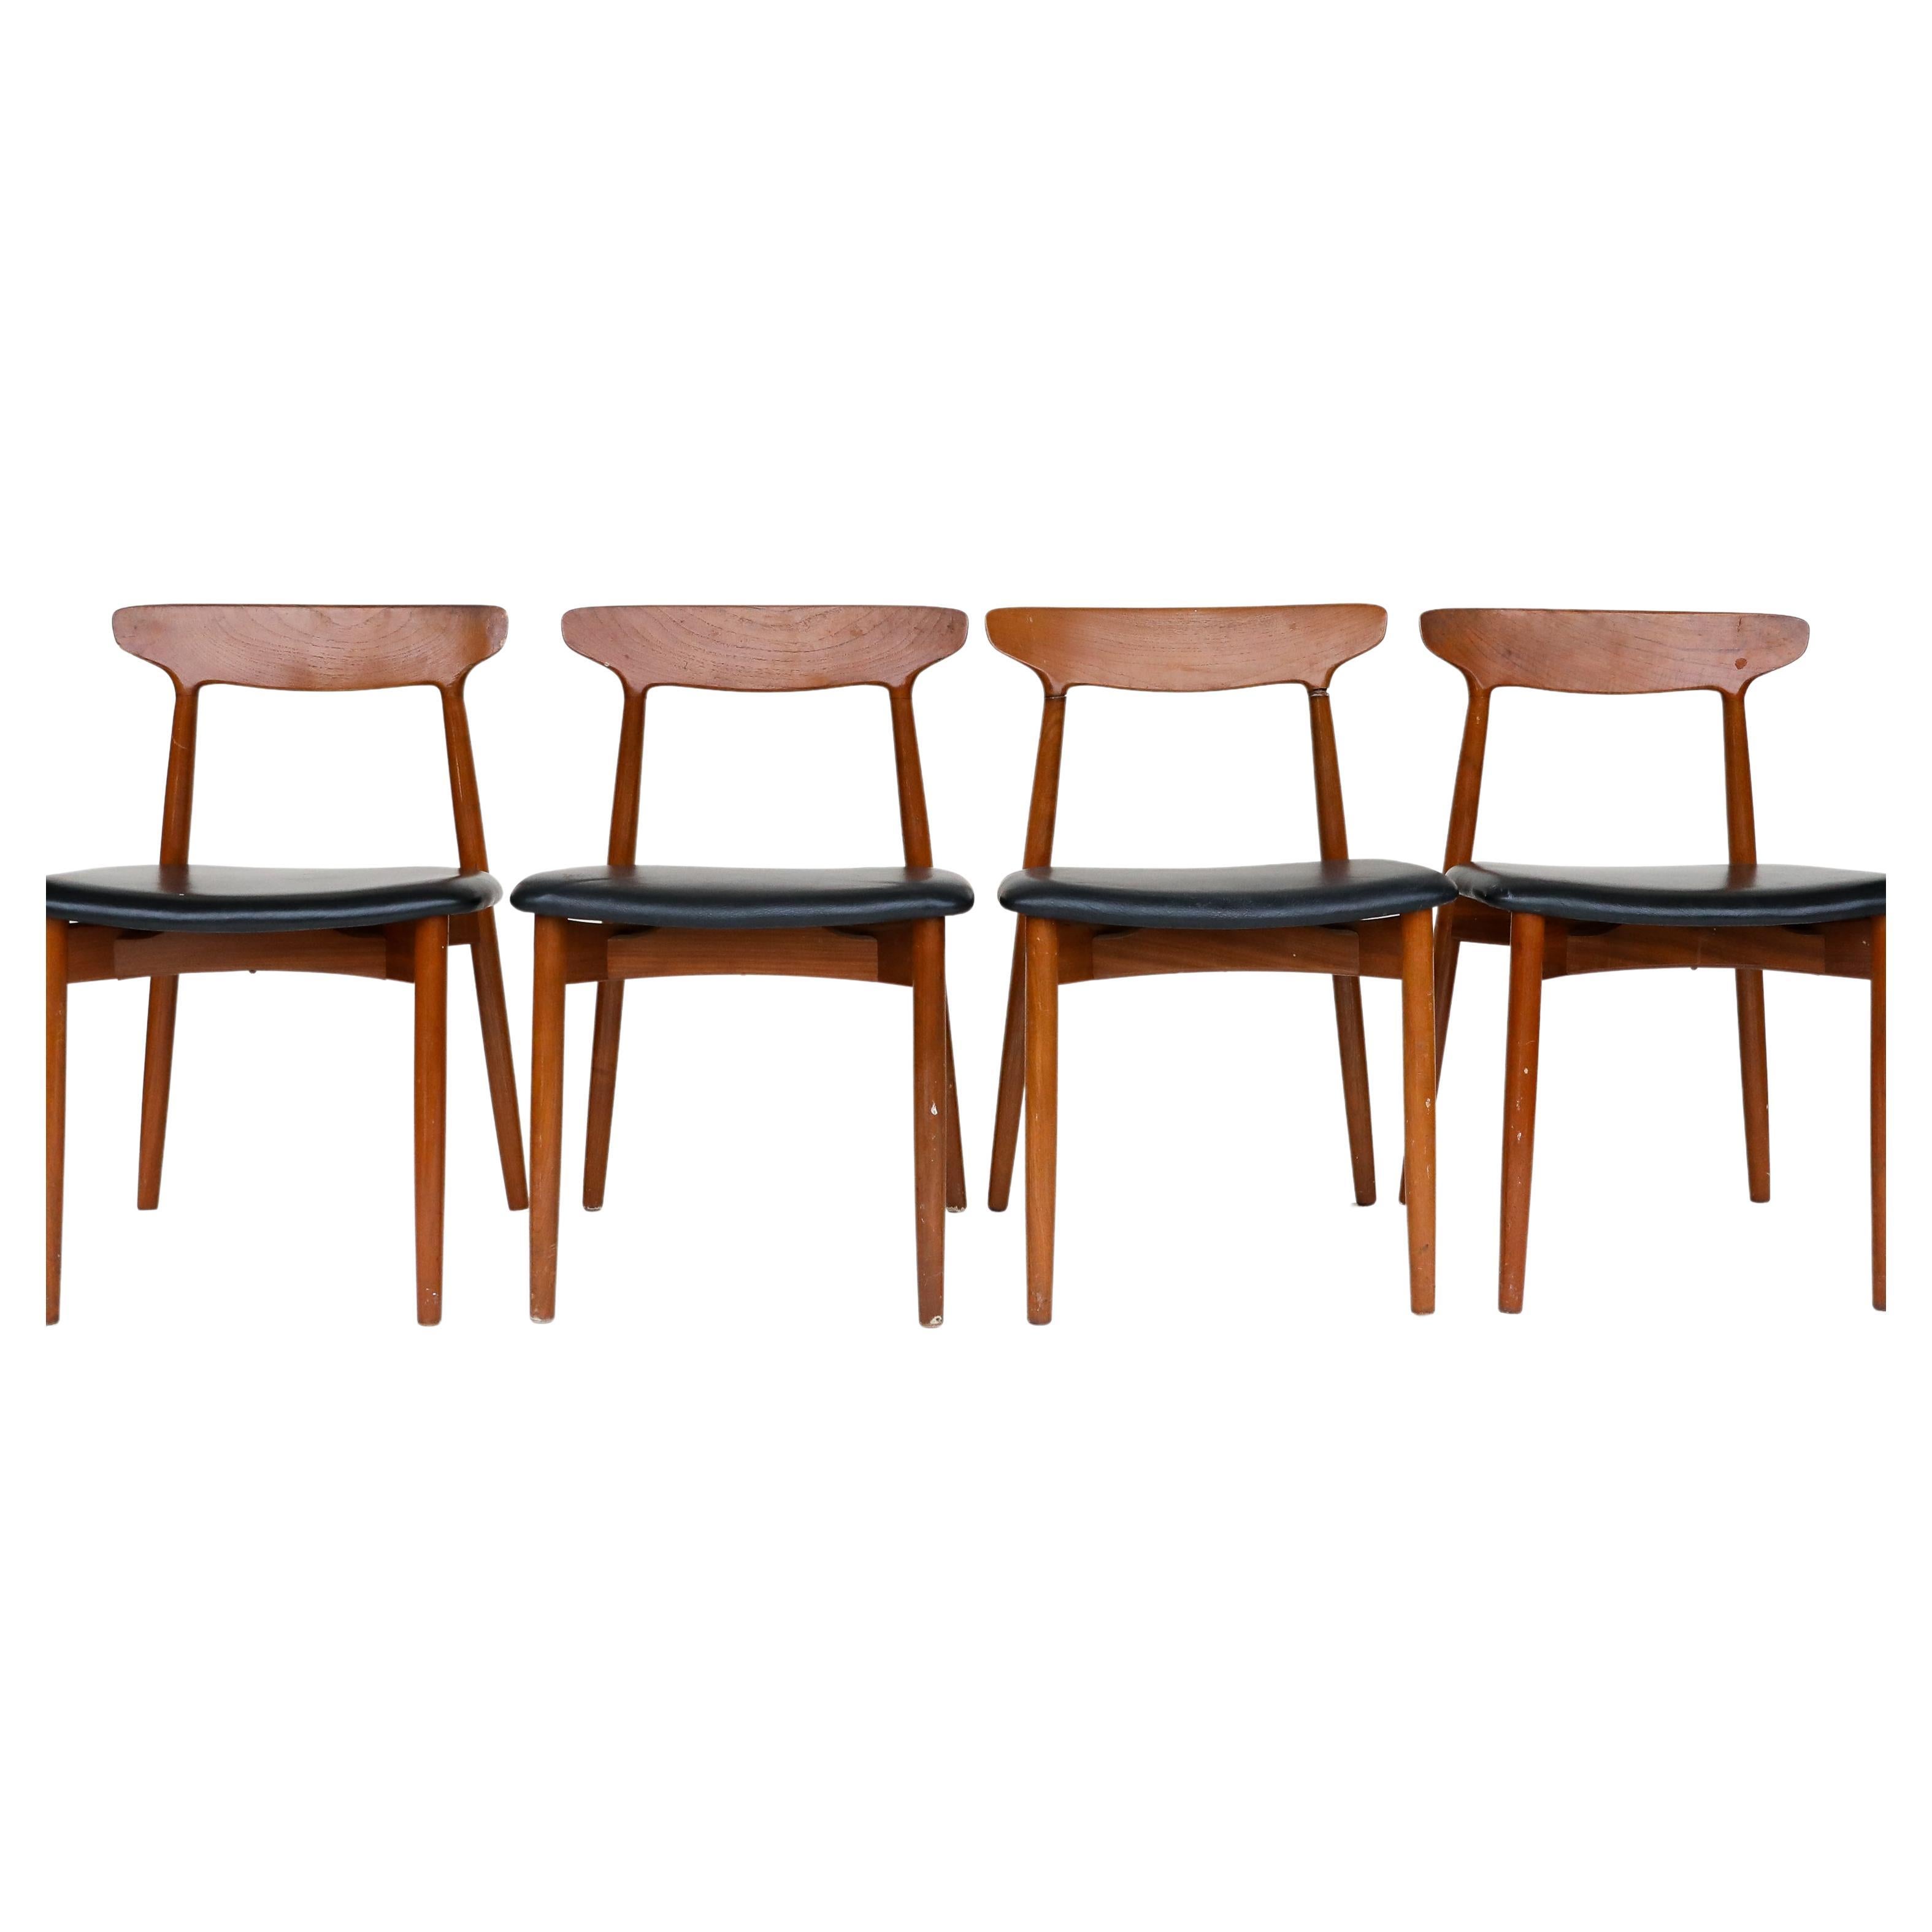  Set of 10 Danish Modern Teak Dining Chairs by Harry Ostergaard